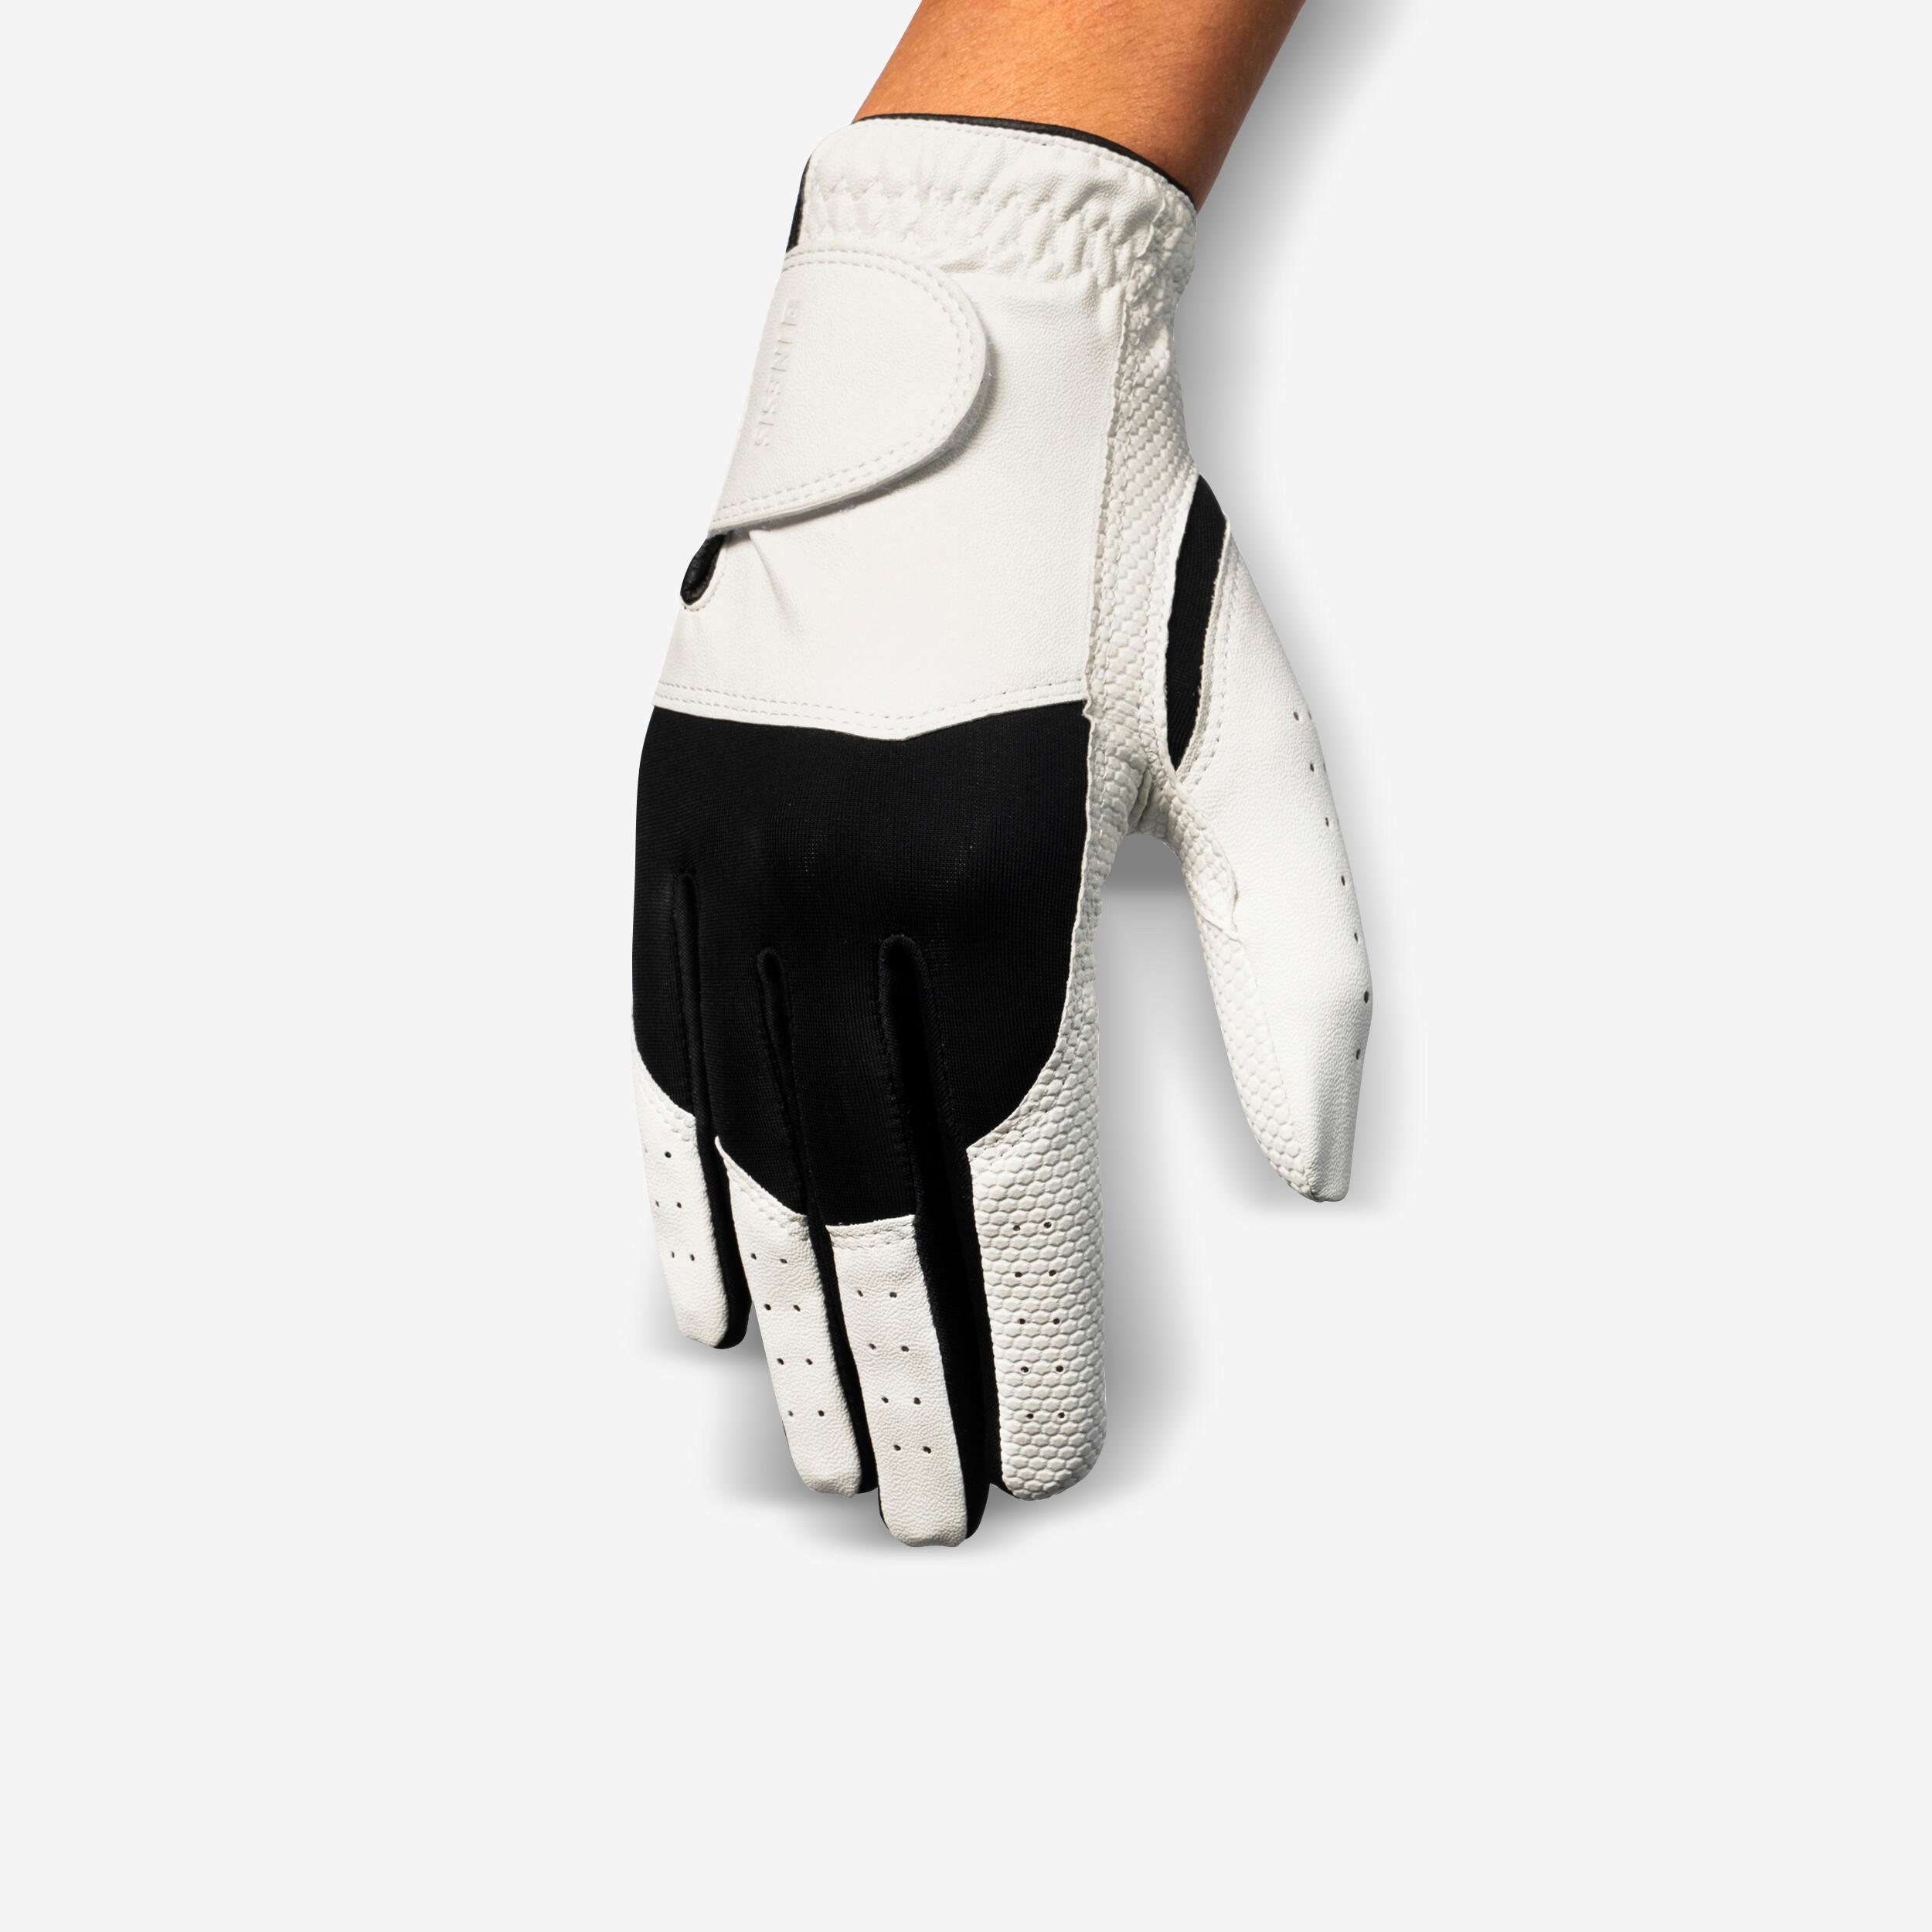 Women's golf resistance glove for Left-Handed players - white and black 1/5